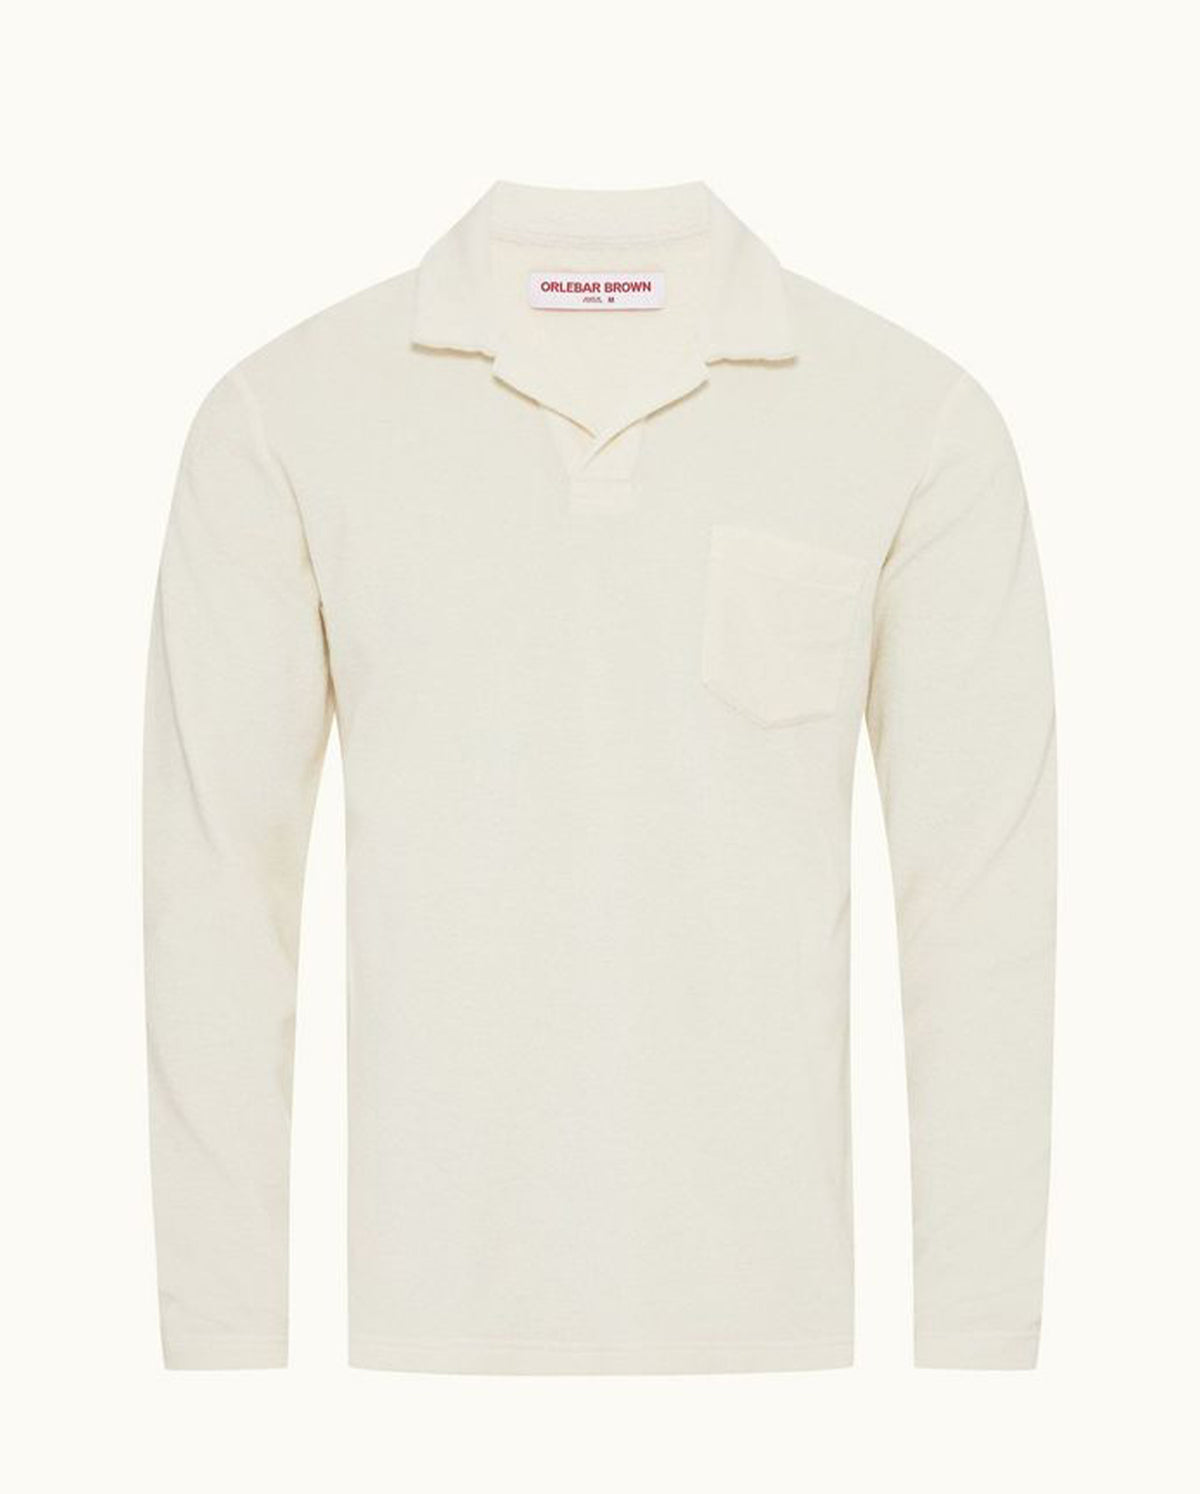 Terry Towelling Long Sleeve Polo Shirt